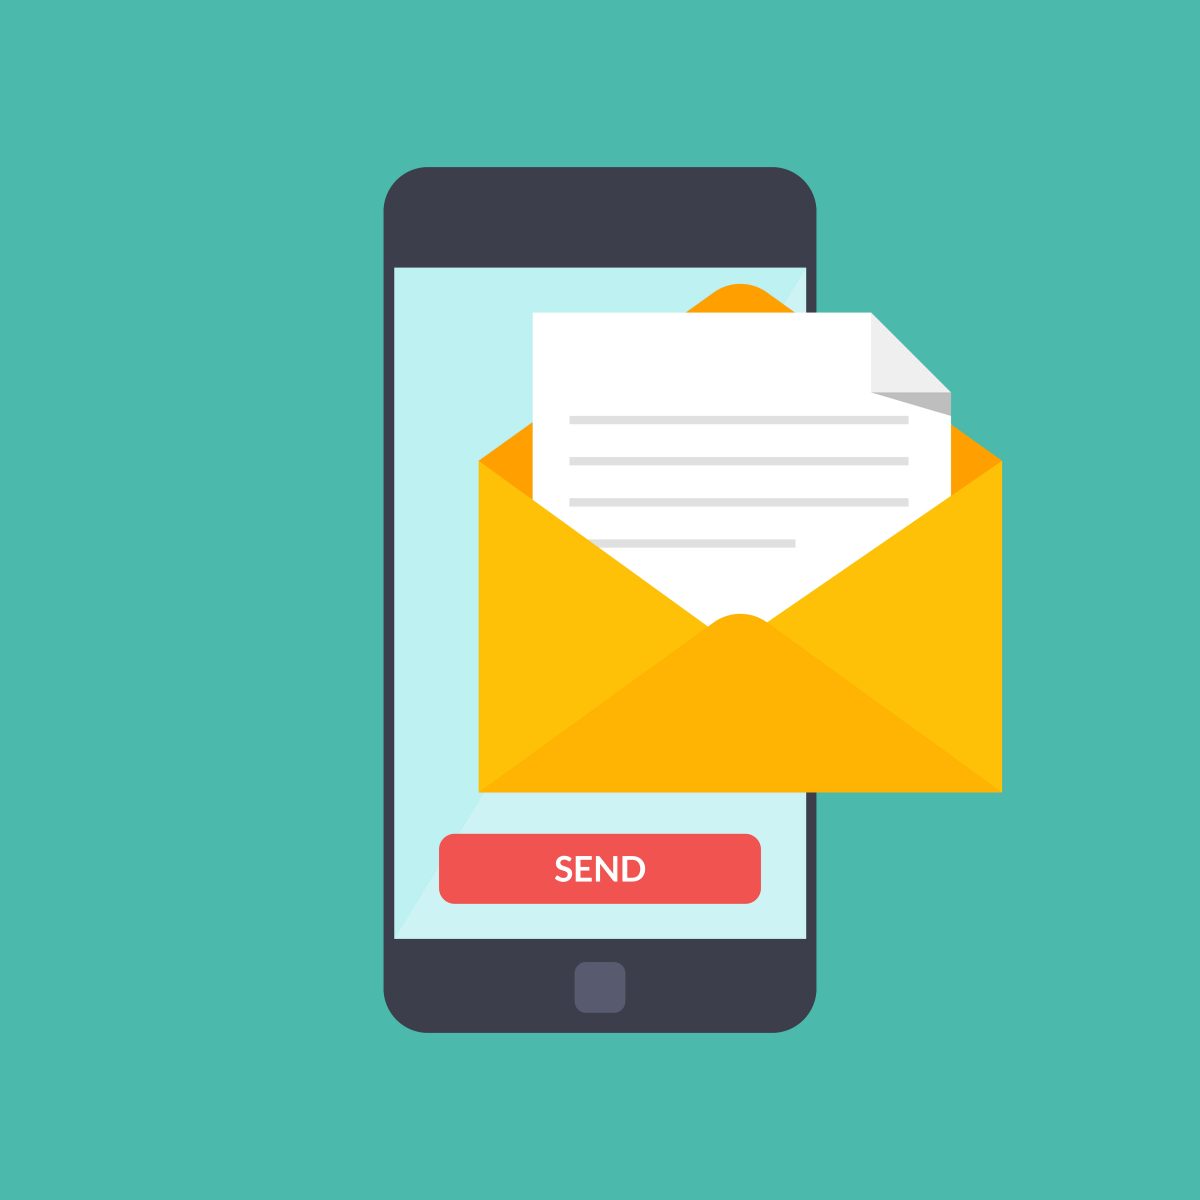 Why Use Konnect’s SMS Marketing Service